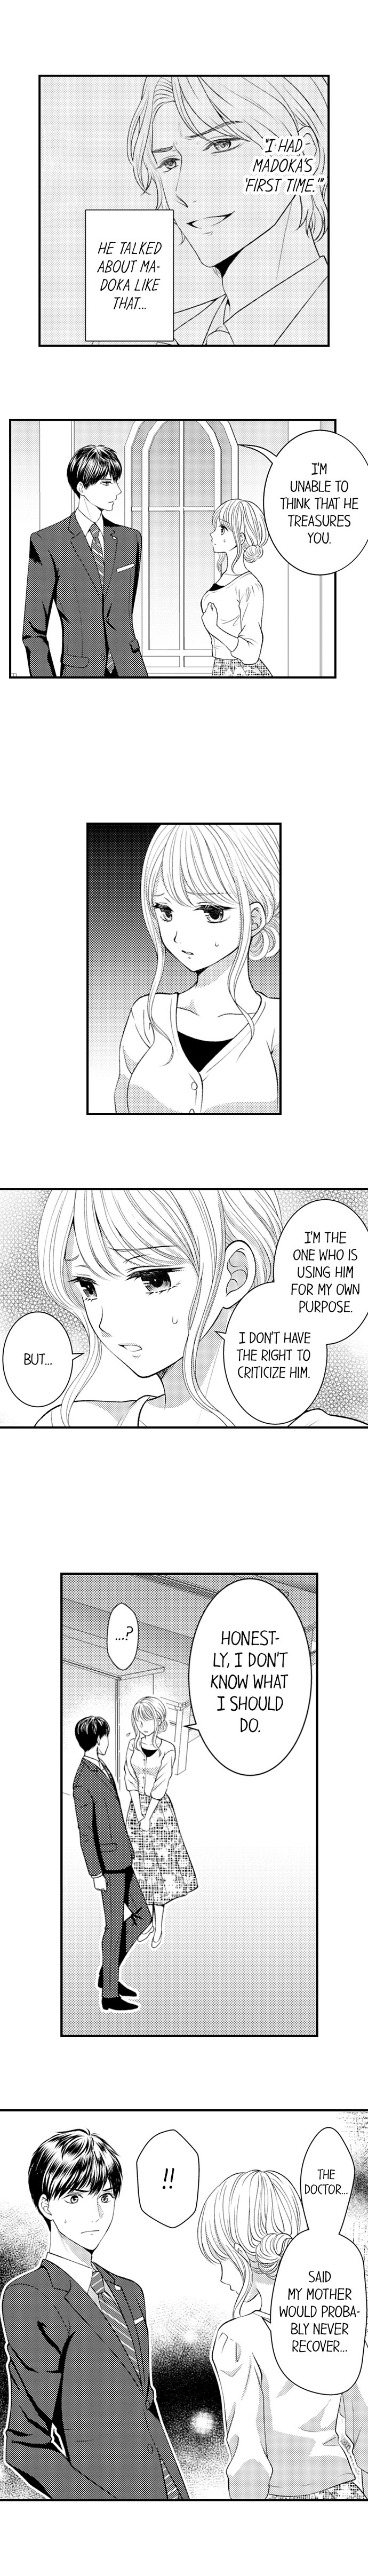 Cheating in a One-Sided Relationship - Chapter 11 Page 6